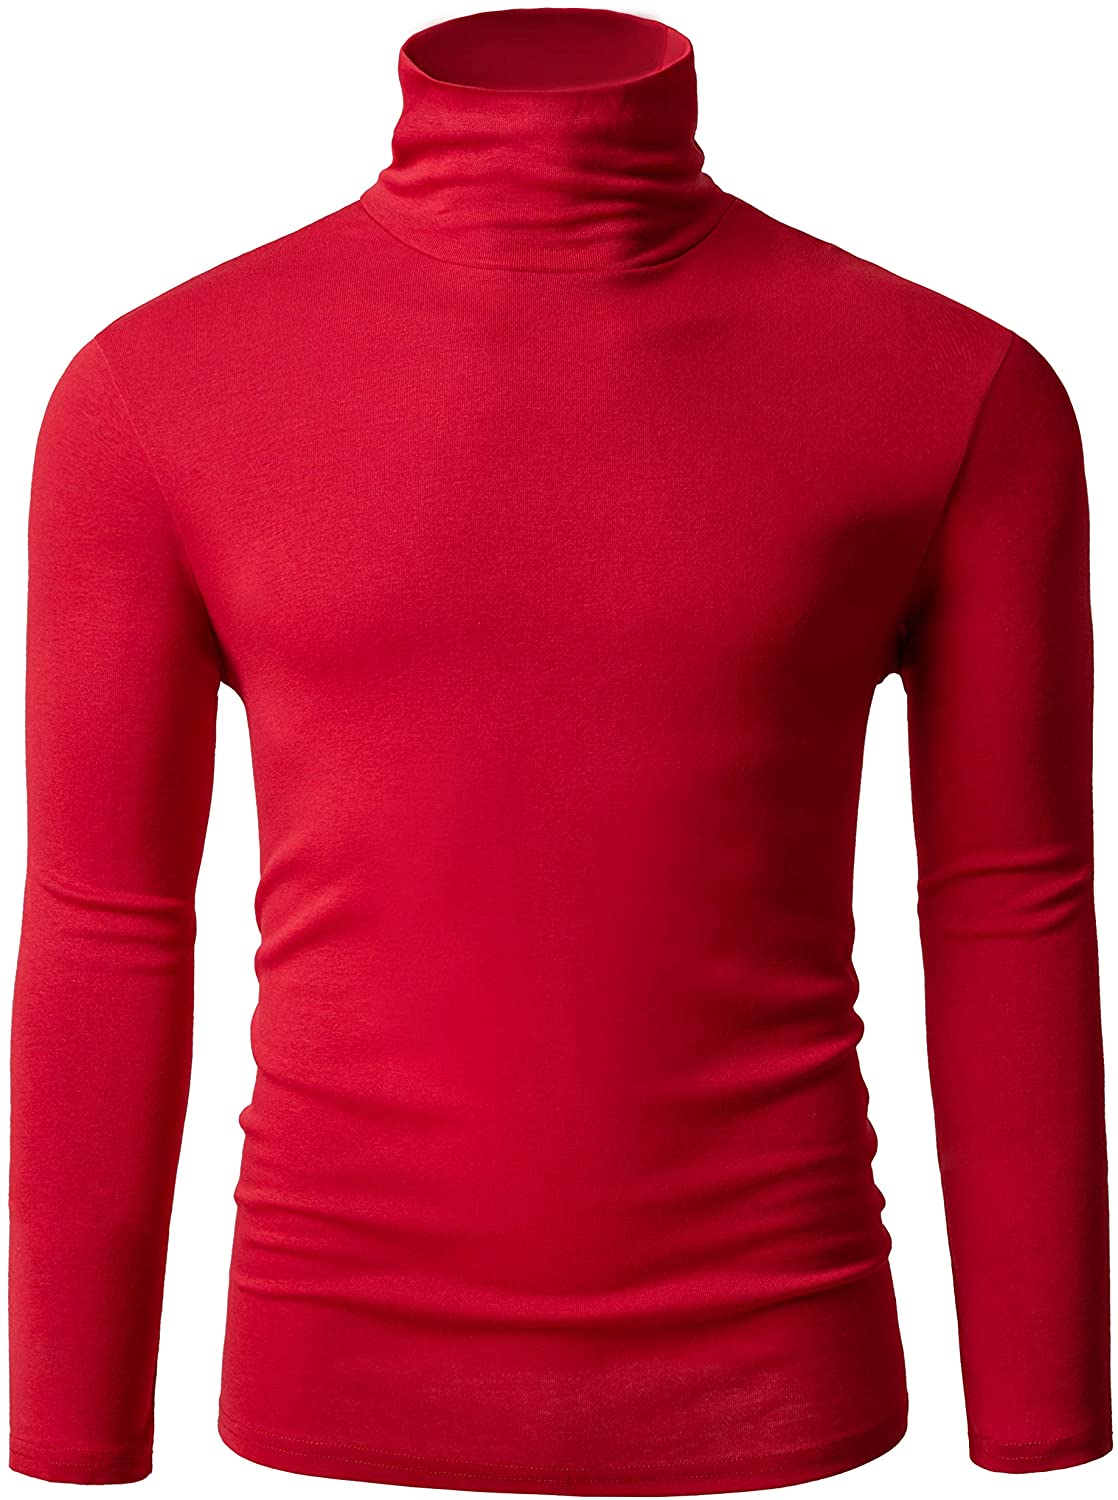 TAPULCO Men Turtleneck Long Sleeve Knitted Pullover Basic Slim Fit Casual Soft Comfy T Shirts 